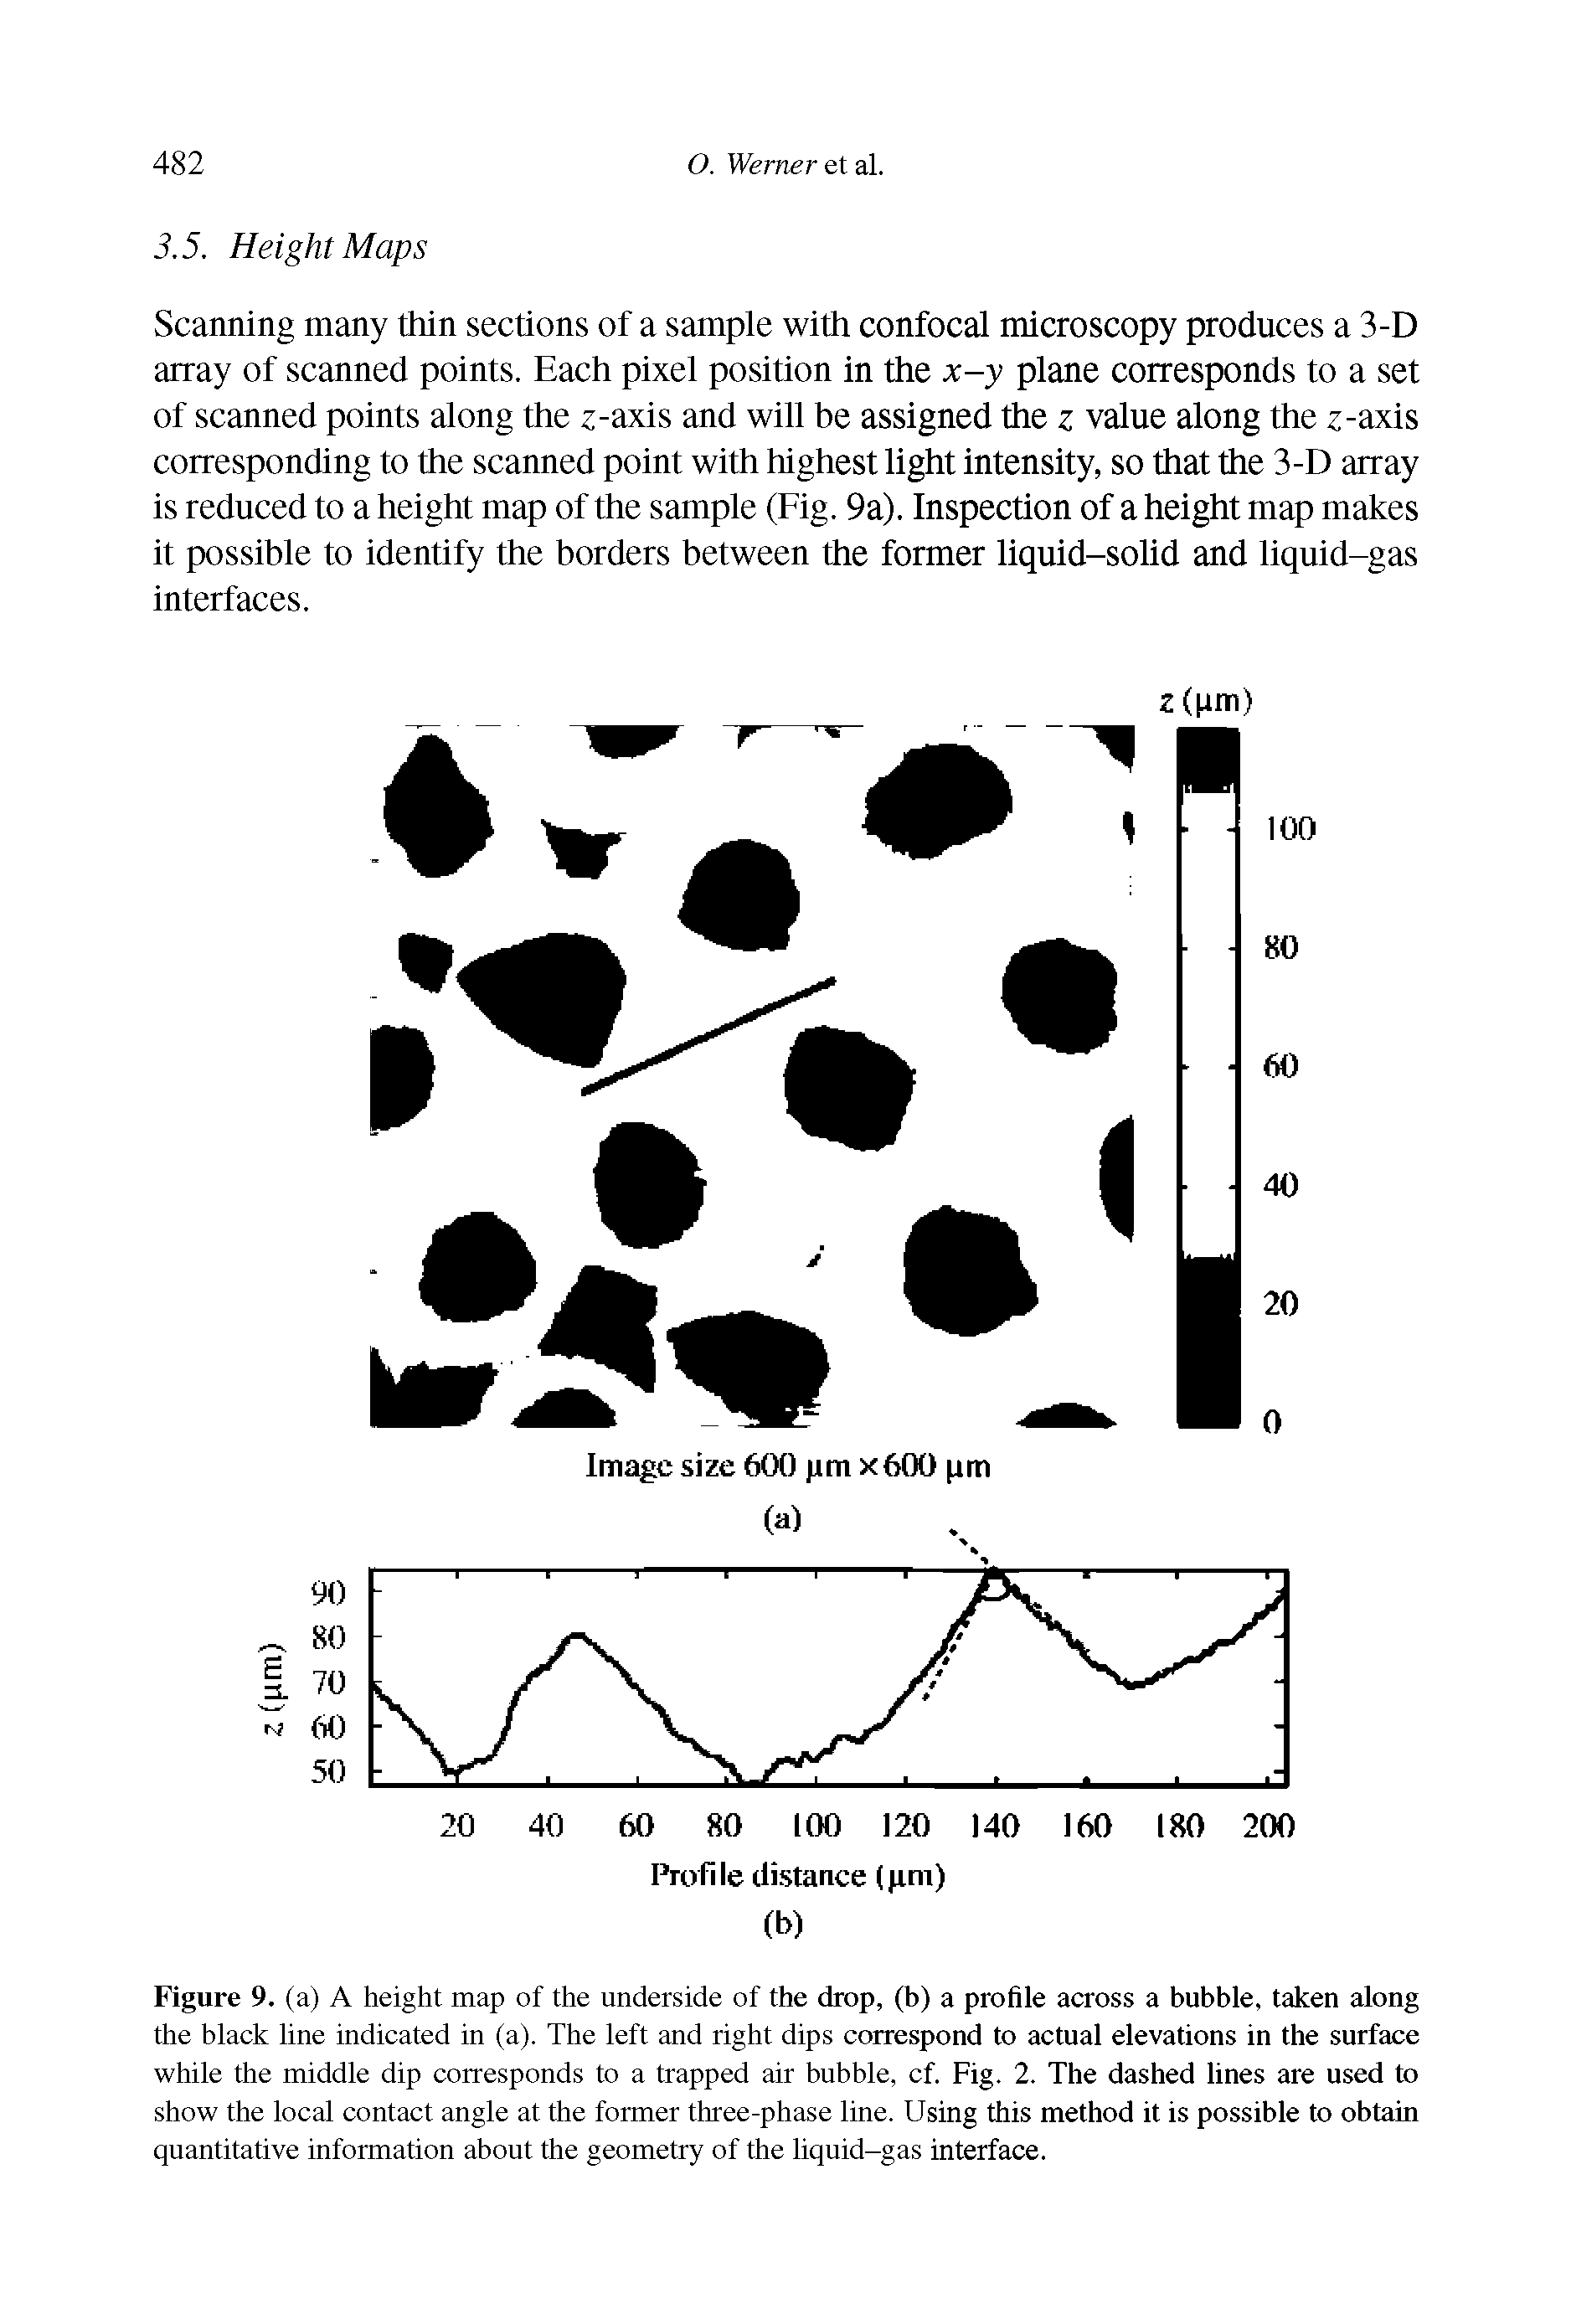 Figure 9. (a) A height map of the underside of the drop, (b) a profile across a bubble, taken along the black line indicated in (a). The left and right dips correspond to actual elevations in the surface while the middle dip corresponds to a trapped air bubble, cf. Fig. 2. The dashed lines are used to show the local contact angle at the former three-phase line. Using this method it is possible to obtain quantitative information about the geometry of the liquid-gas interface.